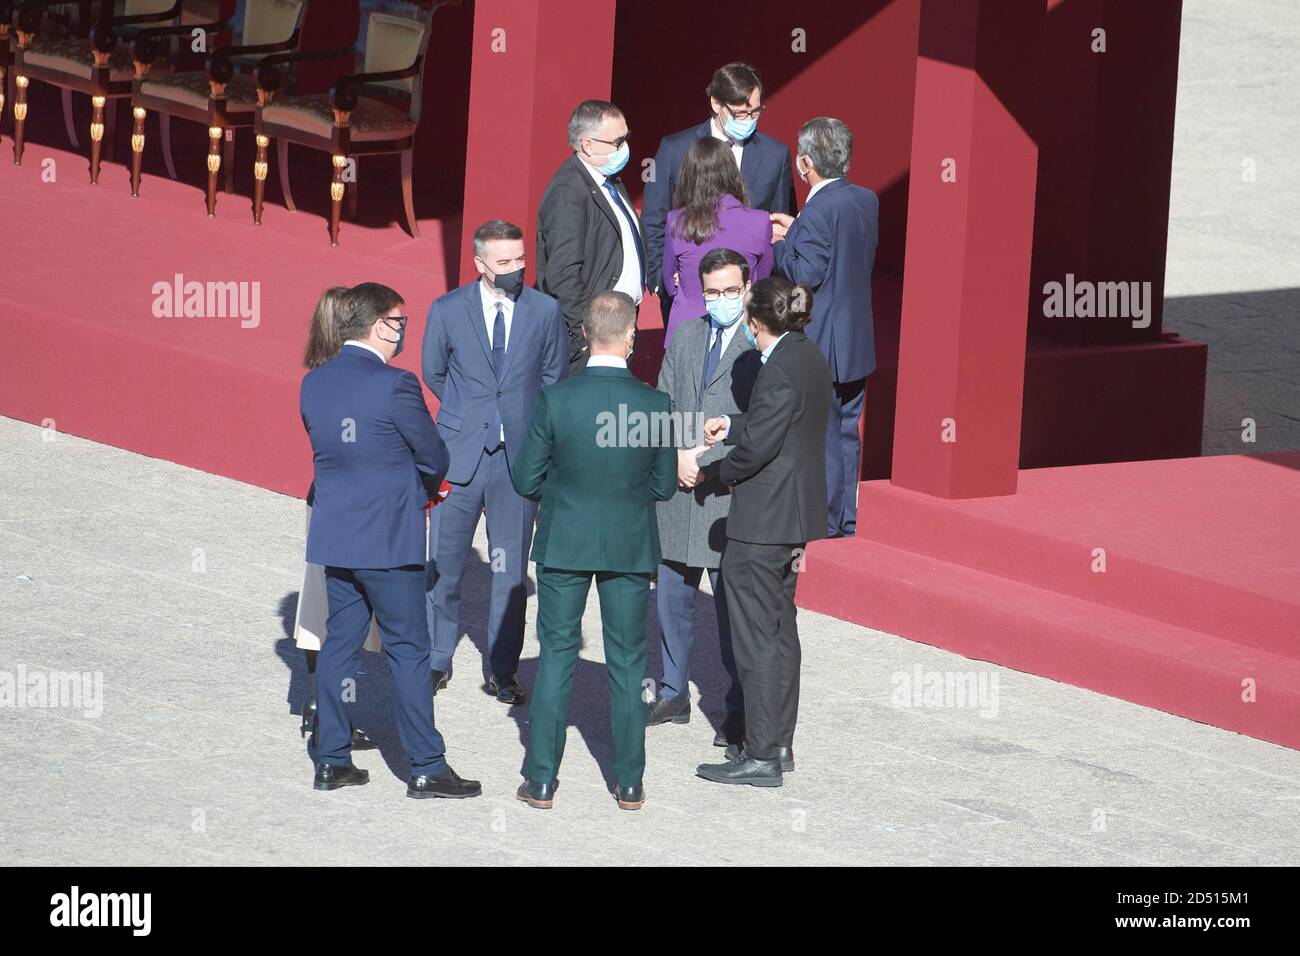 Madrid, Madrid, Spain. 12th Oct, 2020. Irene Montero, Pablo Iglesias, Alberto Garzon attends The National Day Military Parade at Royal Palace on October 12, 2020 in Madrid, Spain Credit: Jack Abuin/ZUMA Wire/Alamy Live News Stock Photo